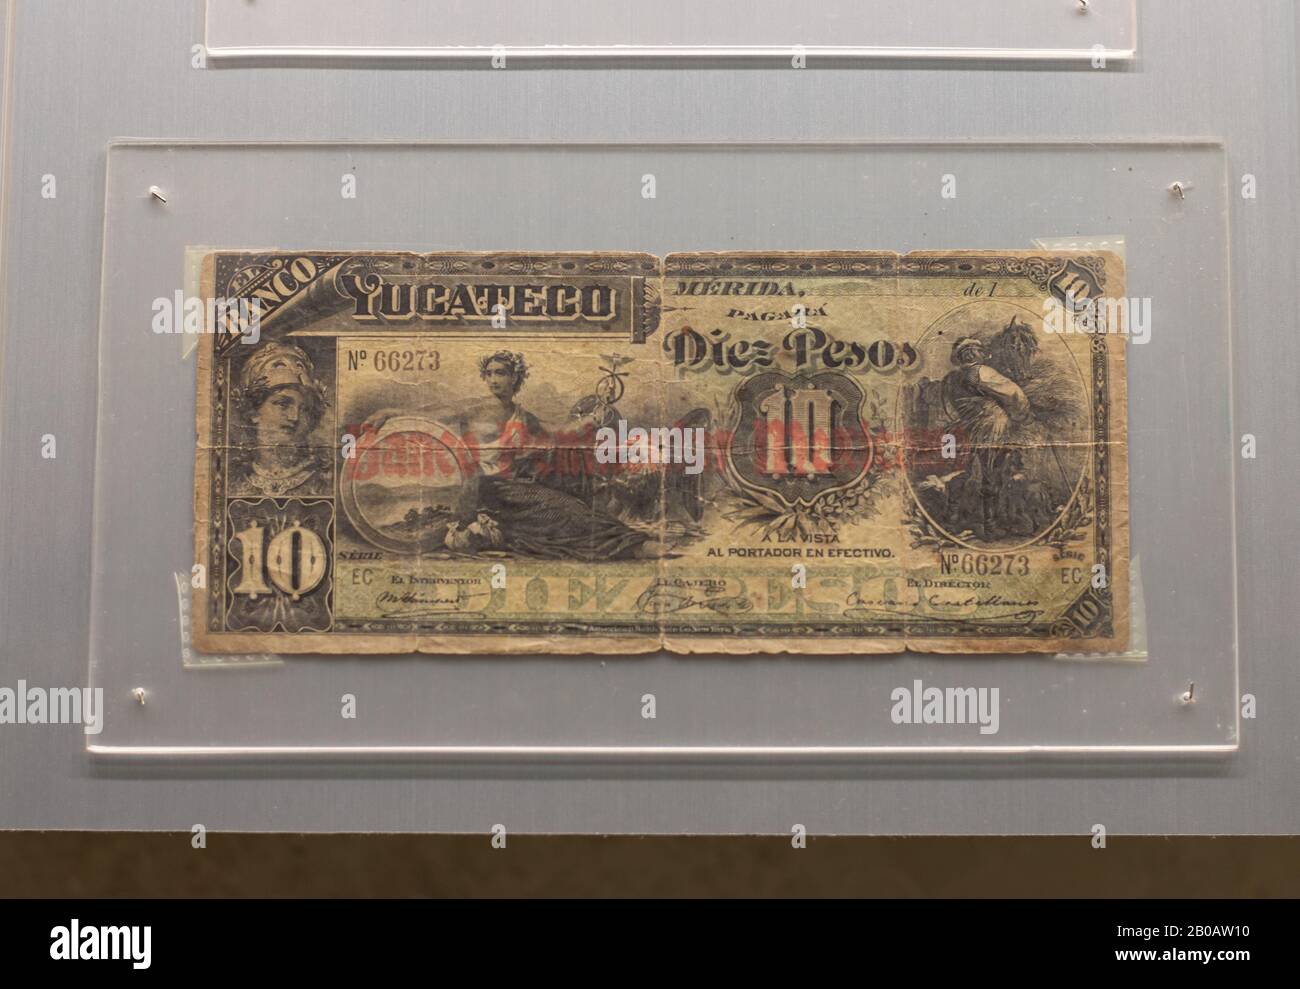 Old Mexican bank notes, currency, money, from the Banco Peninsular Mexicano. Merida, Yucatan, Mexico. Stock Photo